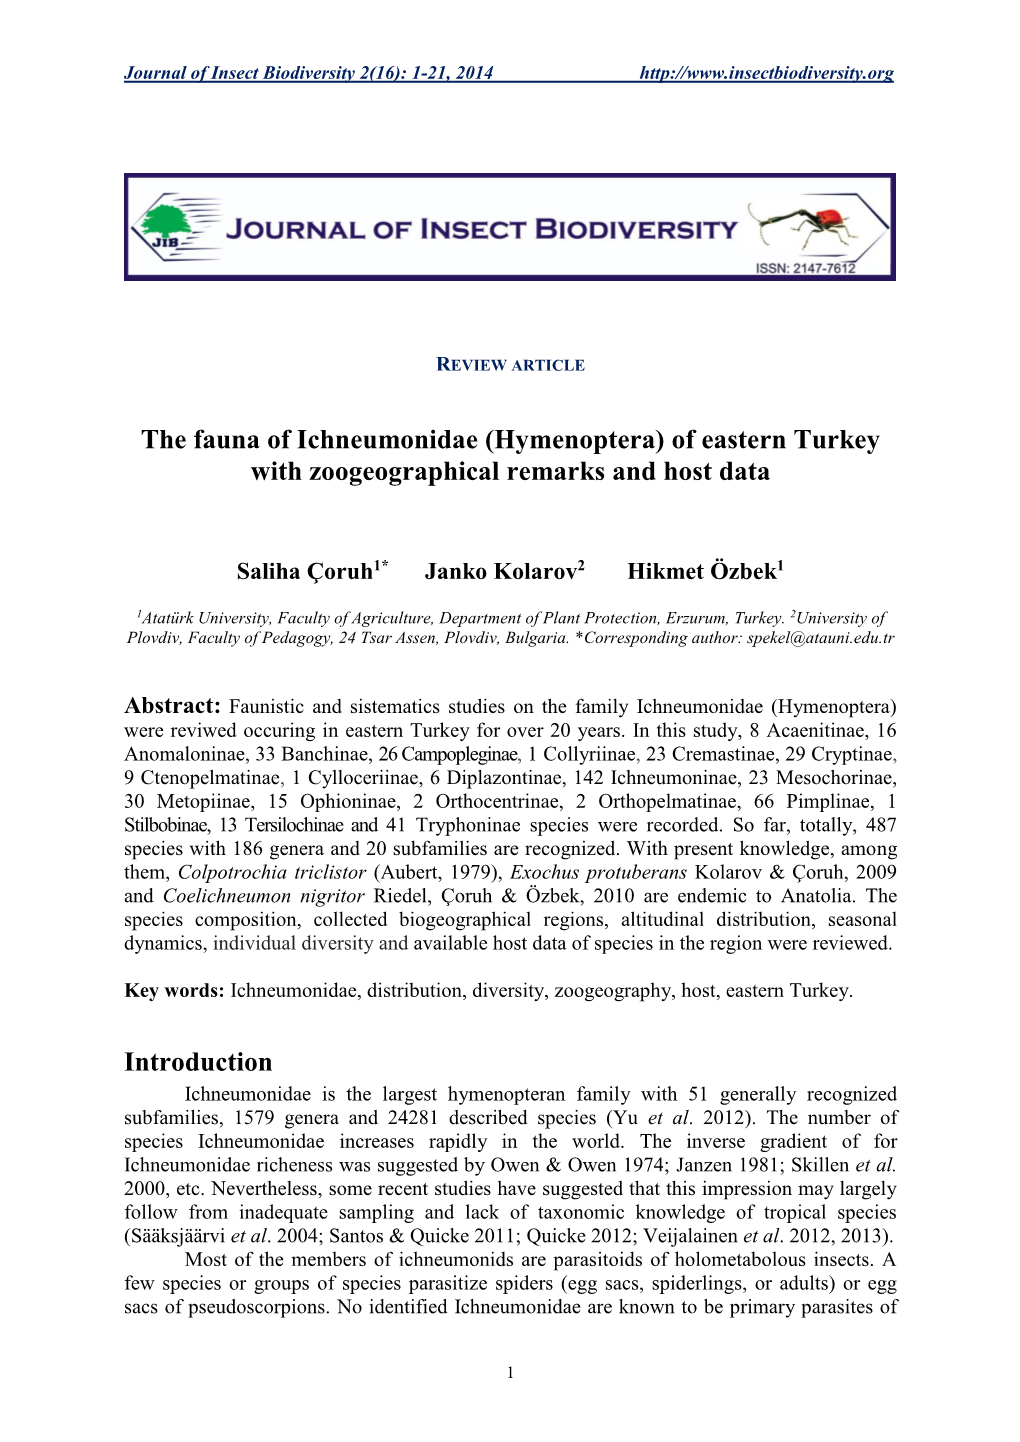 Hymenoptera) of Eastern Turkey with Zoogeographical Remarks and Host Data